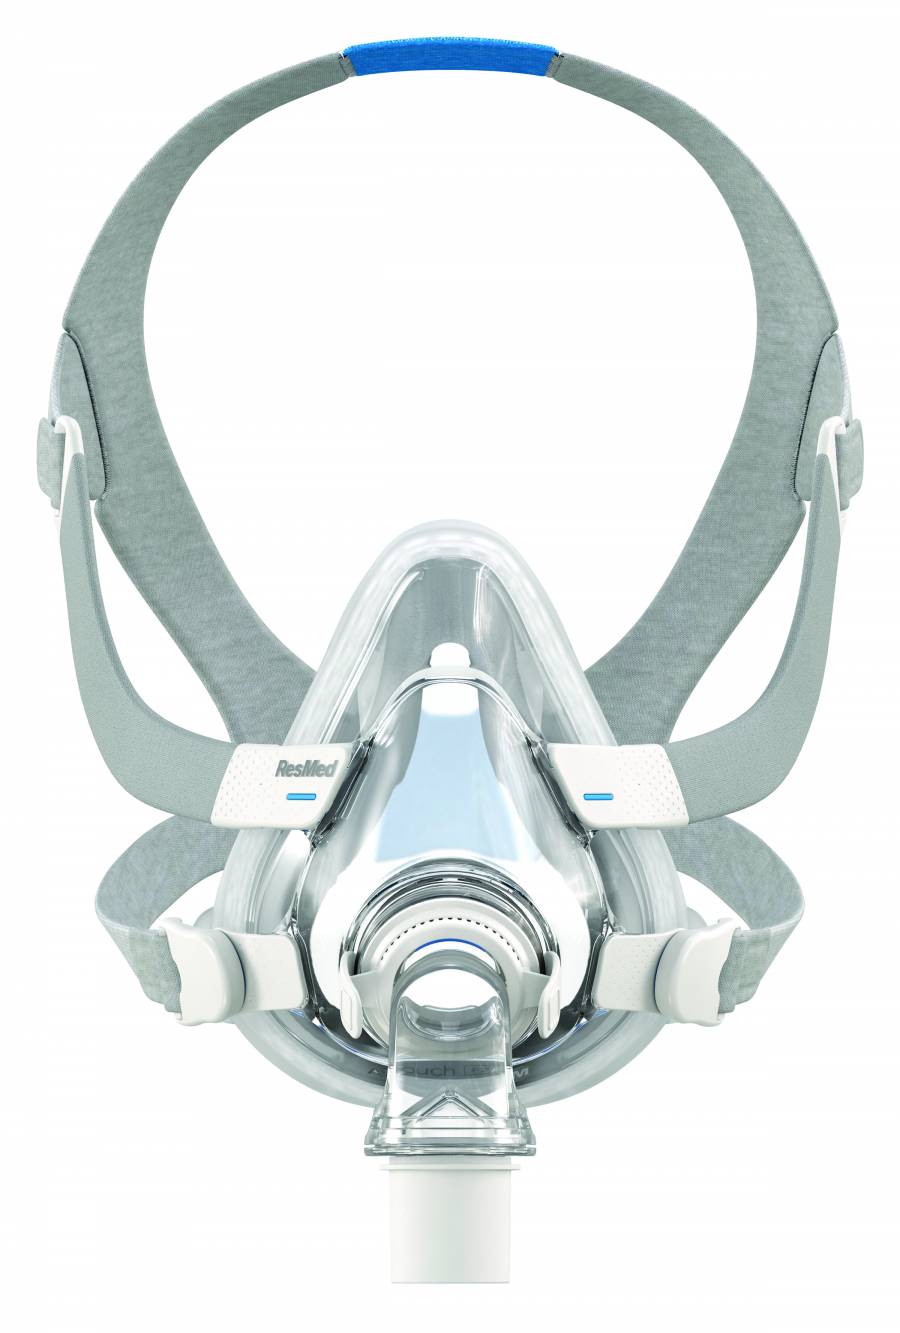 resmed airtouch™ f20 complete mask system